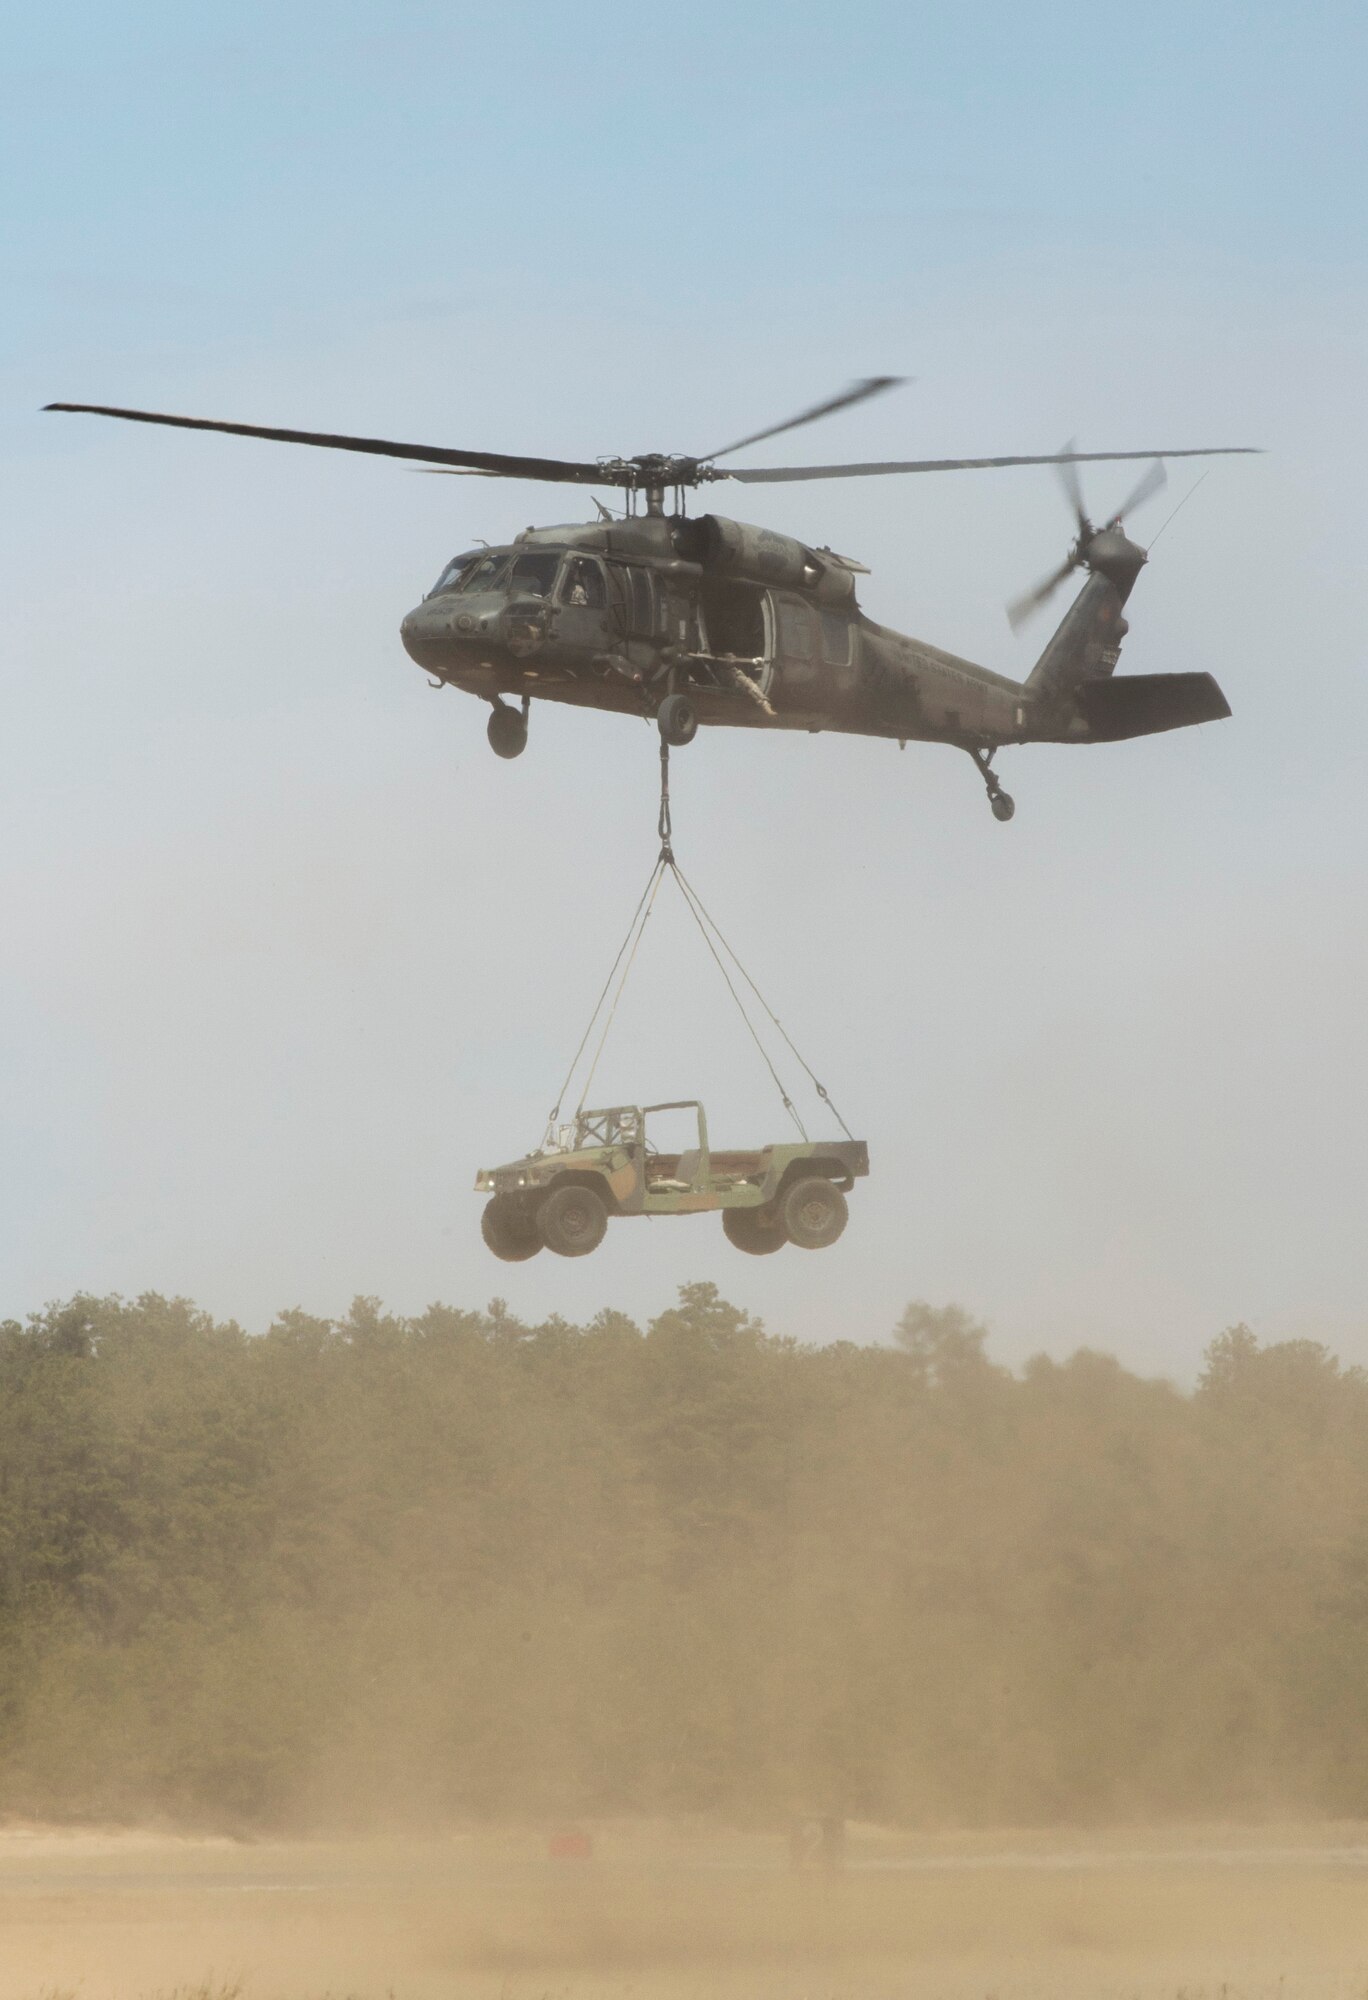 A U.S. Army UH-60 Black Hawk helicopter from the 1-150th Assault Helicopter Battalion lifts a vehicle during sling-load training with the 621st Contingency Response Wing at Joint Base McGuire-Dix-Lakehurst, N.J., April 1, 2015. The training is conducted on a monthly basis. (U.S. Air Force photo/Staff Sgt. Gustavo Gonzalez/RELEASED)